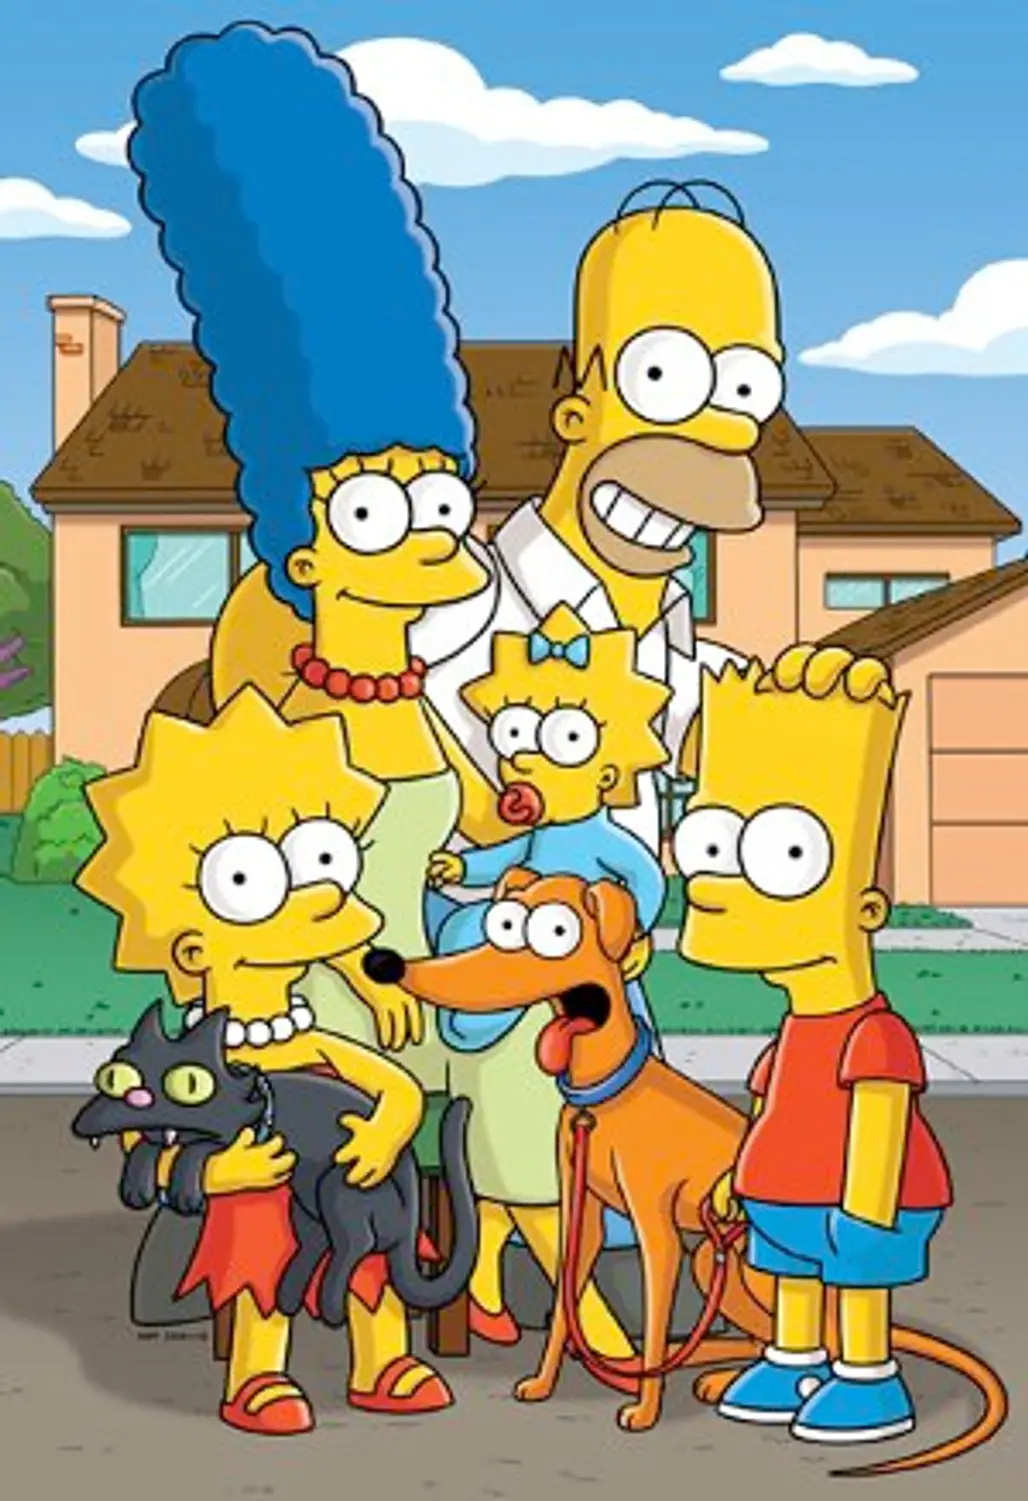 The Simpsons from “the Simpsons”